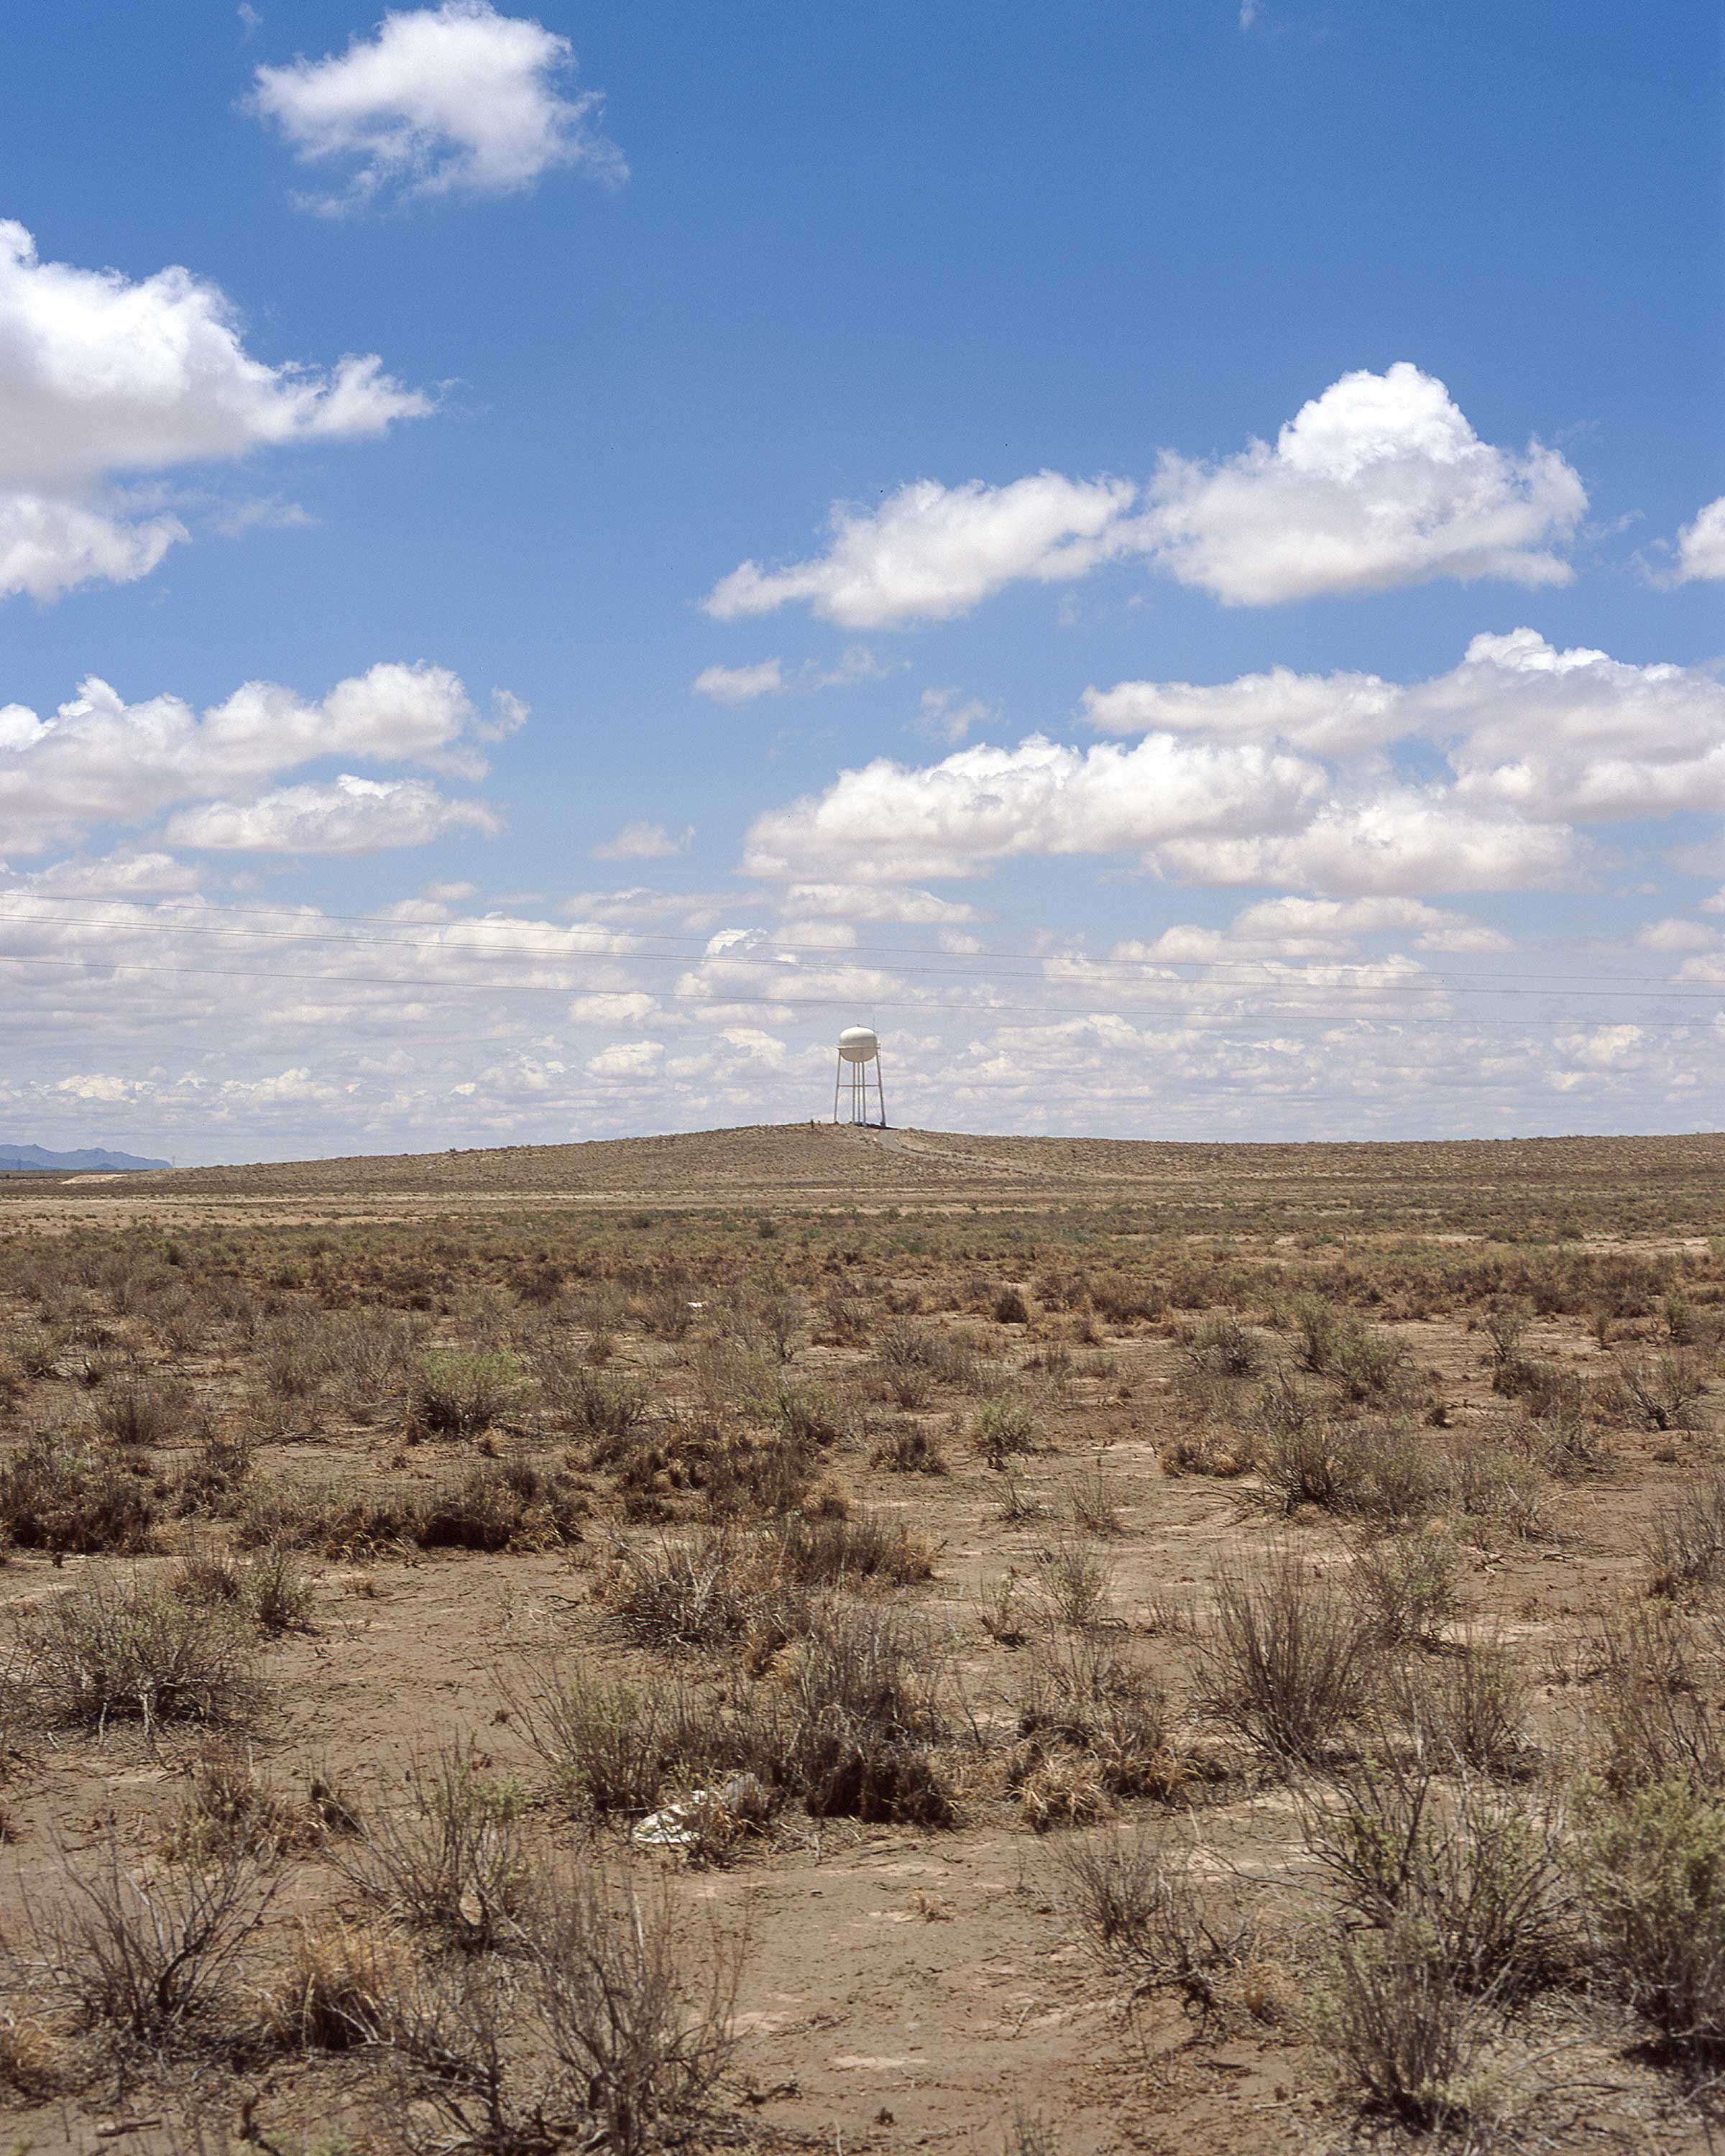 ANDREW-williams-drought-southwest-california-texas-fire-global-warming-photography-contemporary-landscape-documentary_01